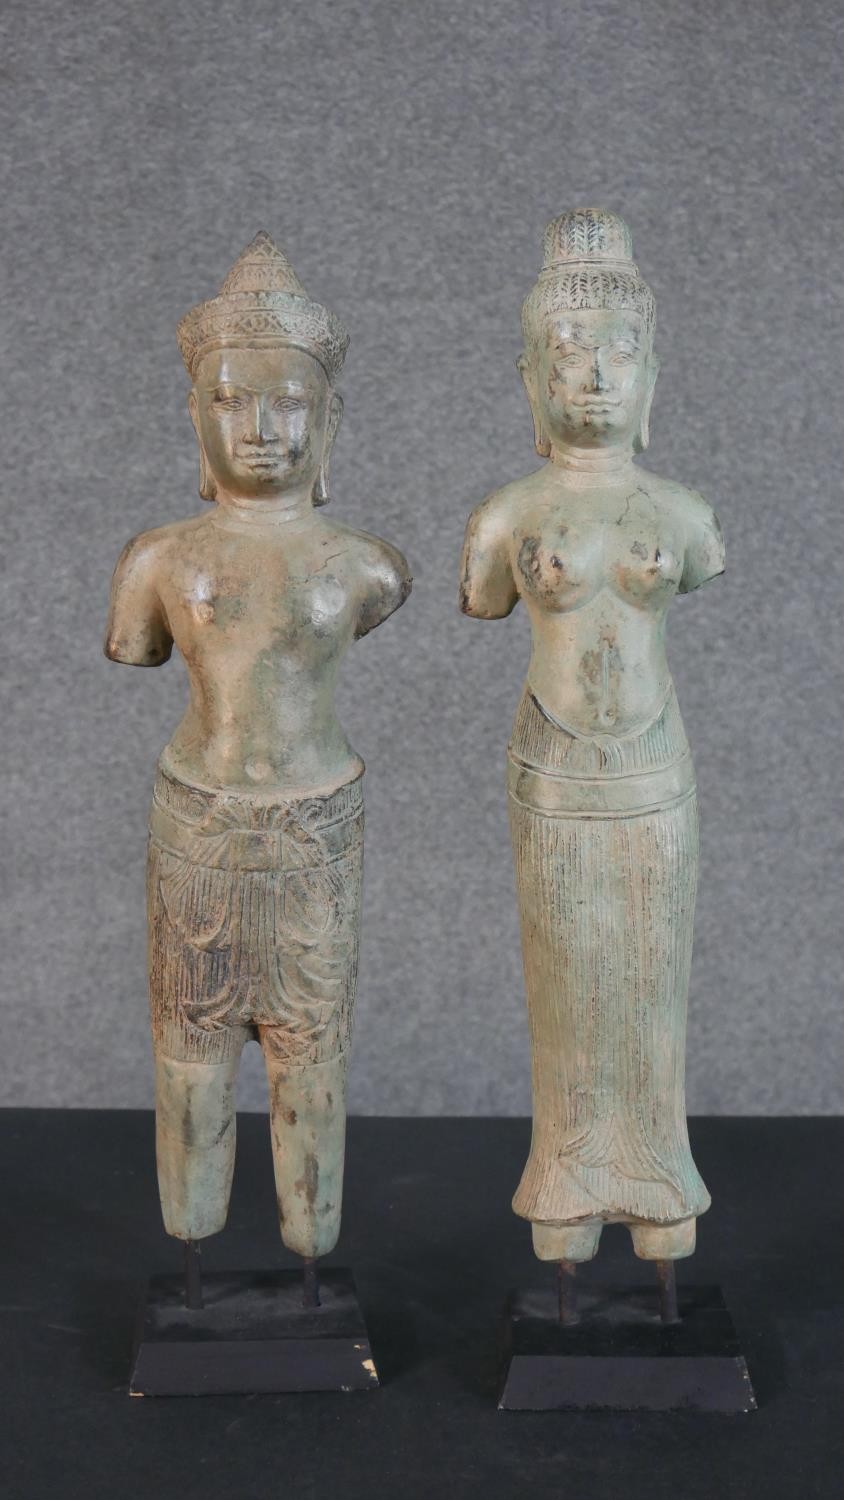 Two Khmer style bronze effect metal figures of two deities on display stands. H.46cm (largest)